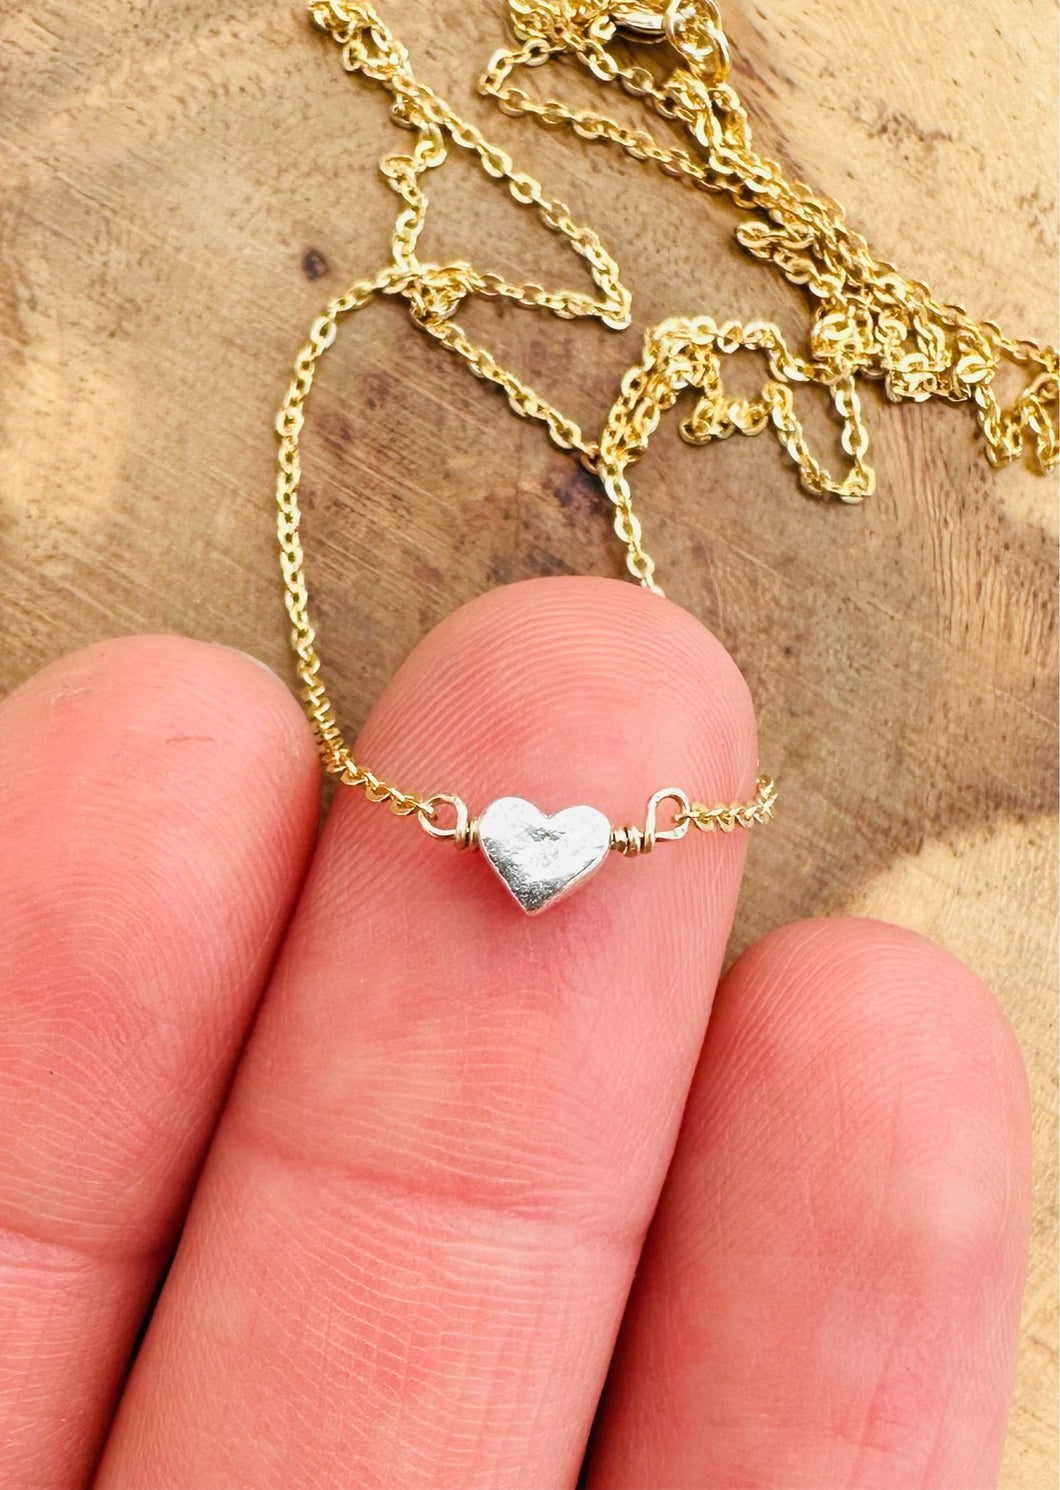 Pixie Heart Necklace - 14k Gold Fill & Fine Silver